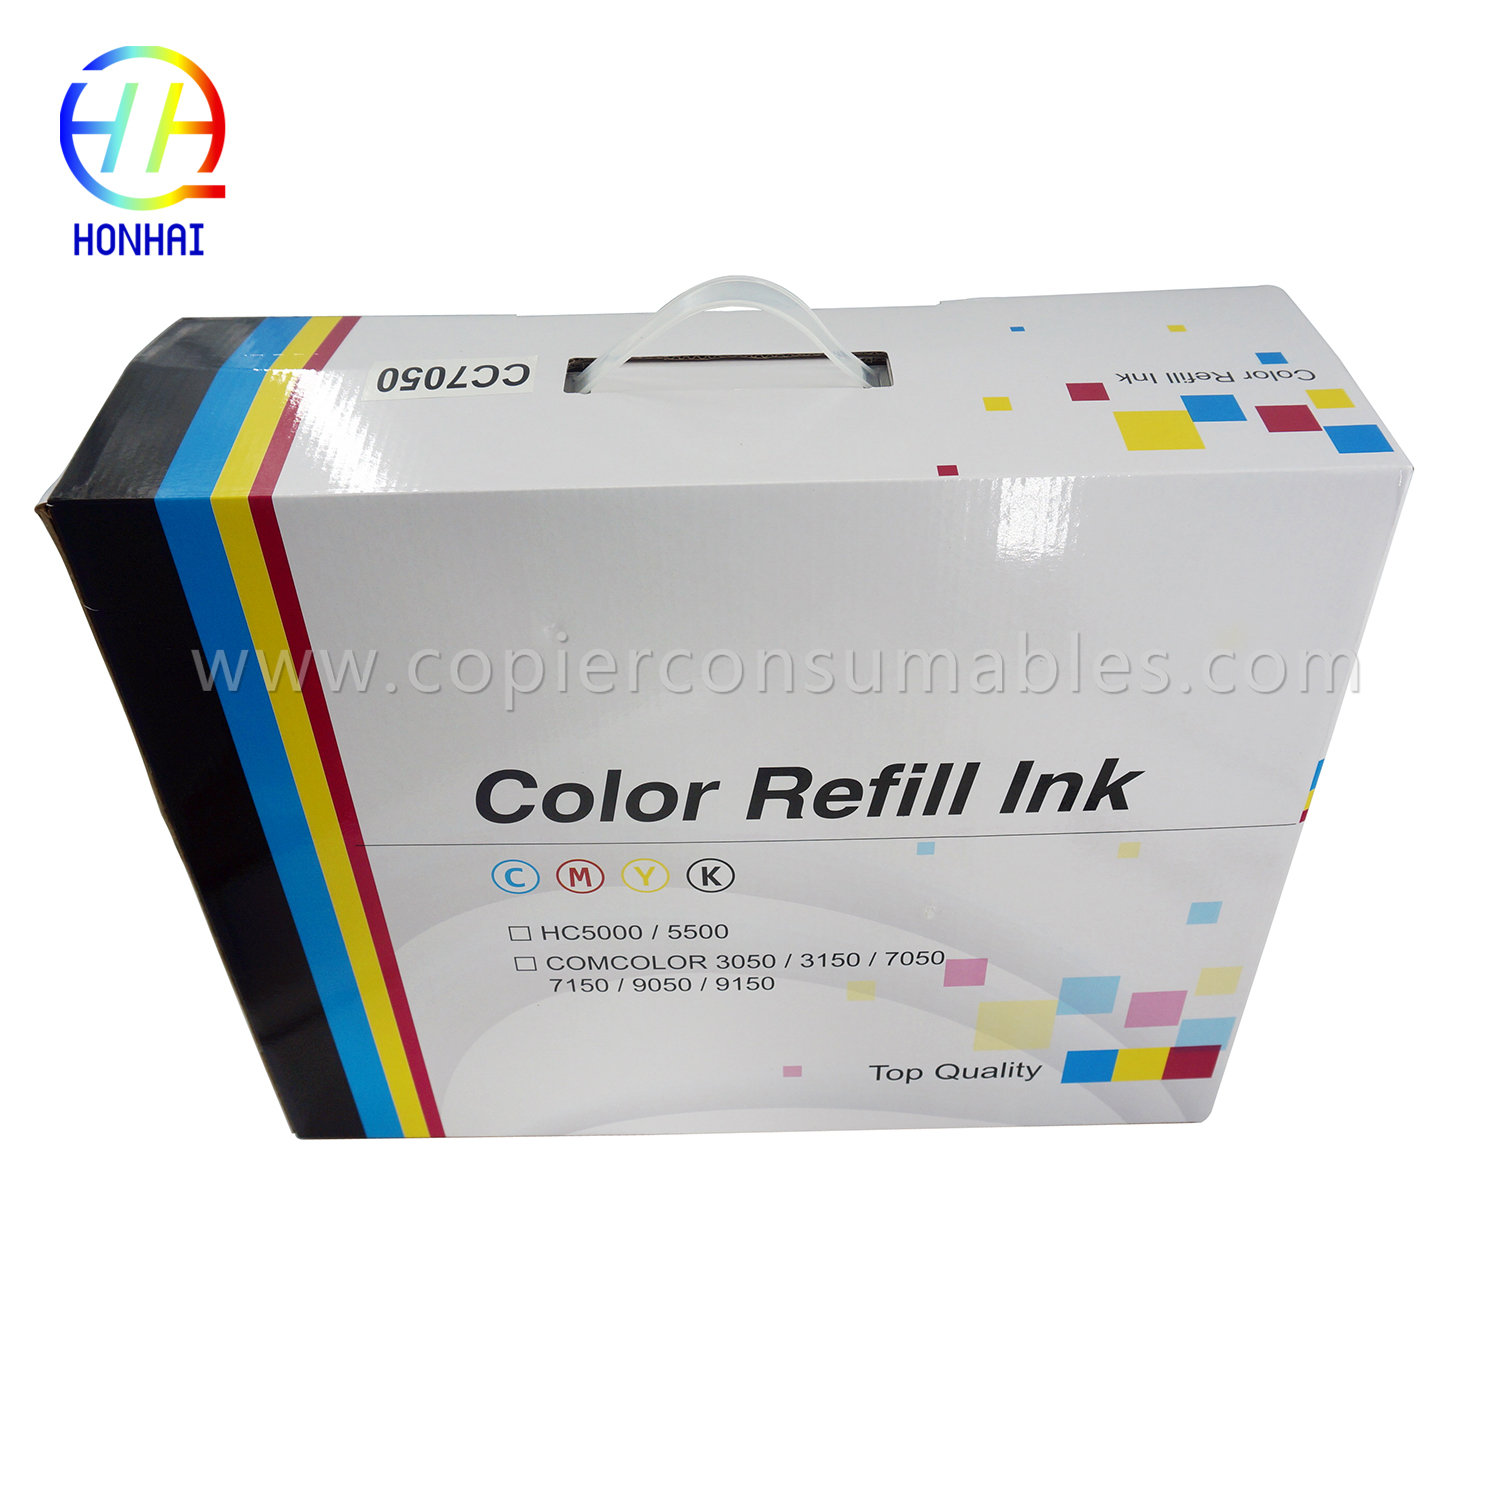 Inktcartridge Risograph ComColor 3010 3050 3150 7010 7050 7150 9050 9150 HC 5000 5500 (S-6300G S-6301G S-6302G S-6303G) (1)